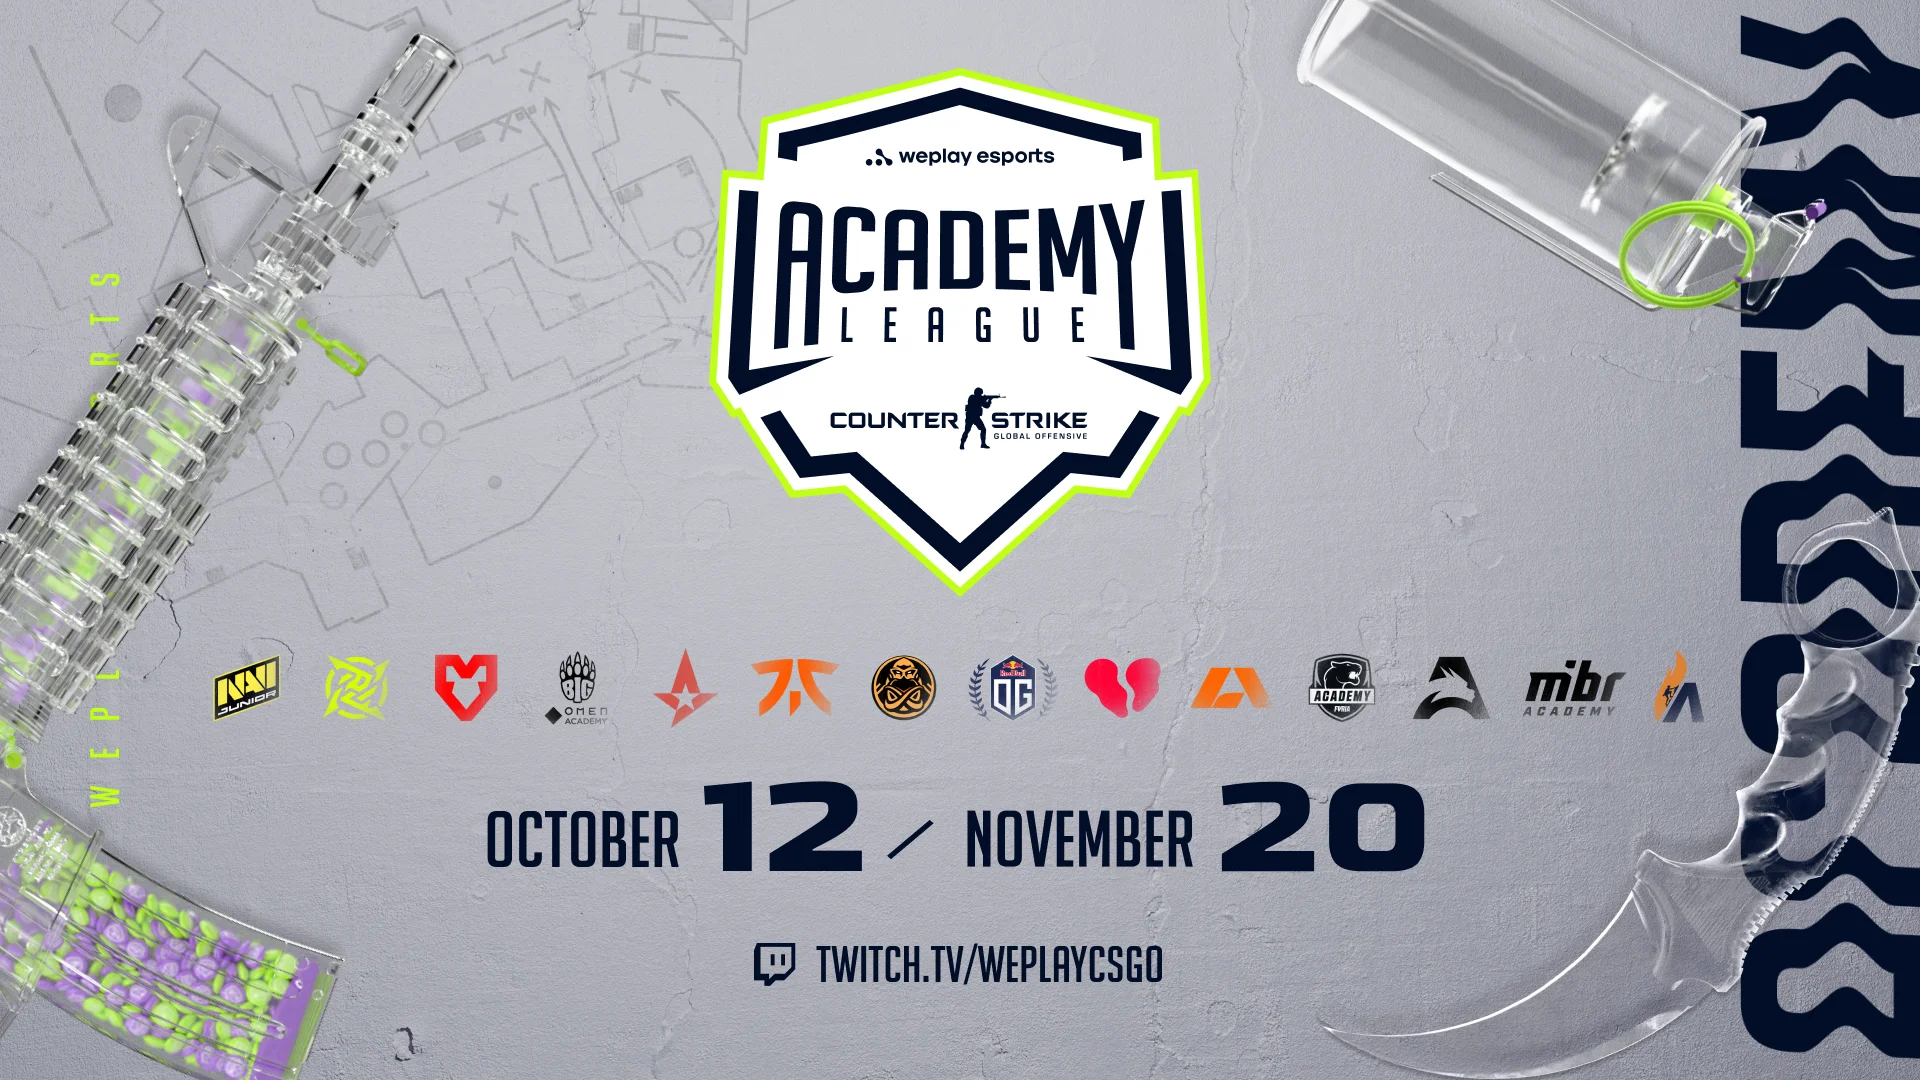 WePlay Academy League is coming back in October. Visual: WePlay Holding